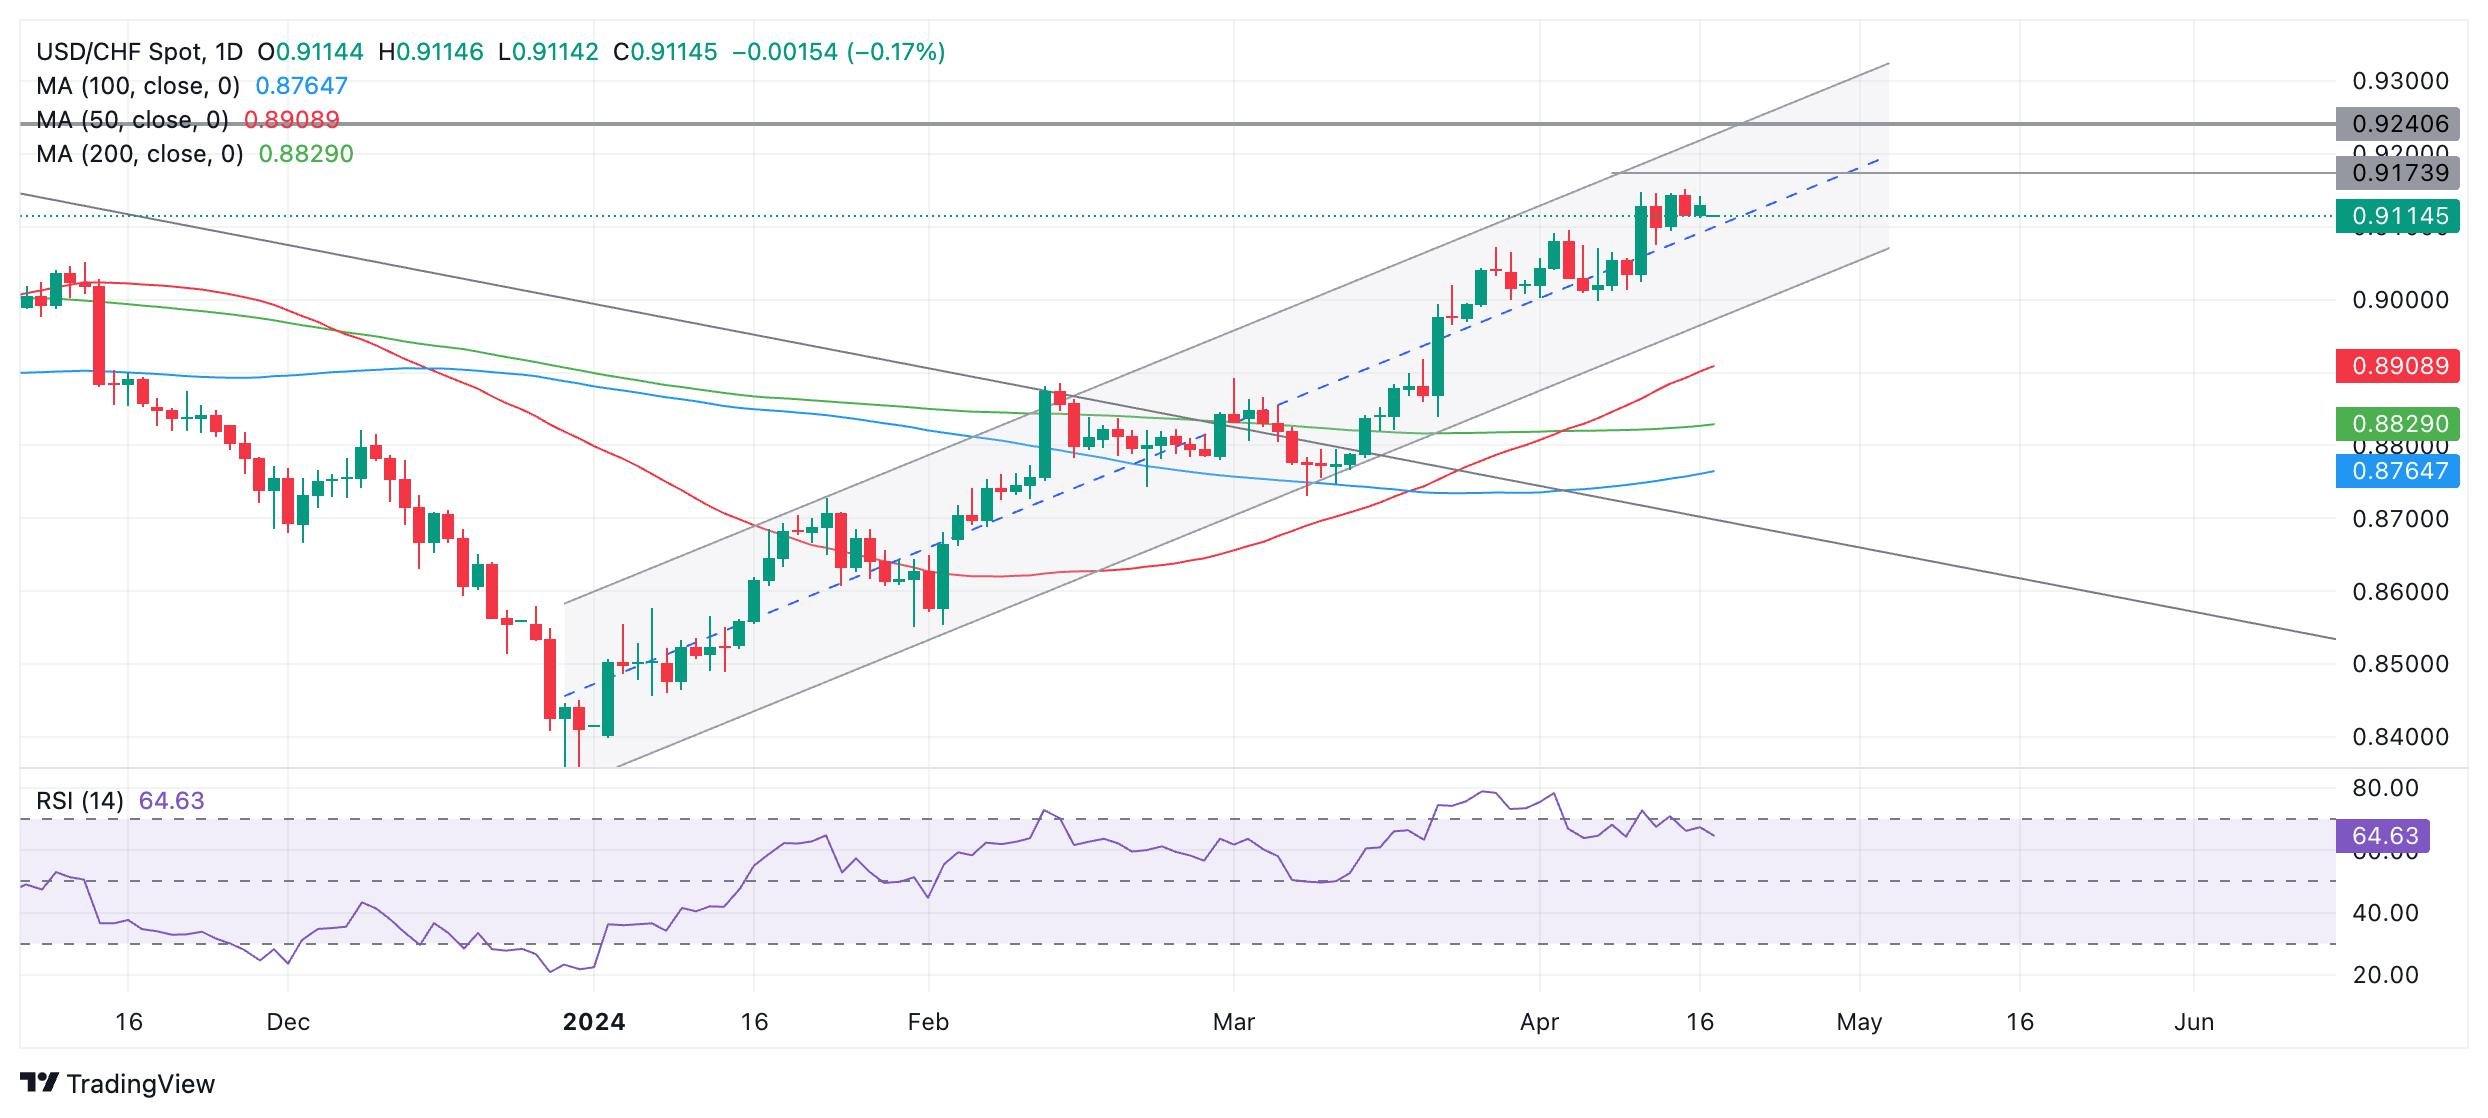 USD/CHF Price Analysis: Rising in a channel